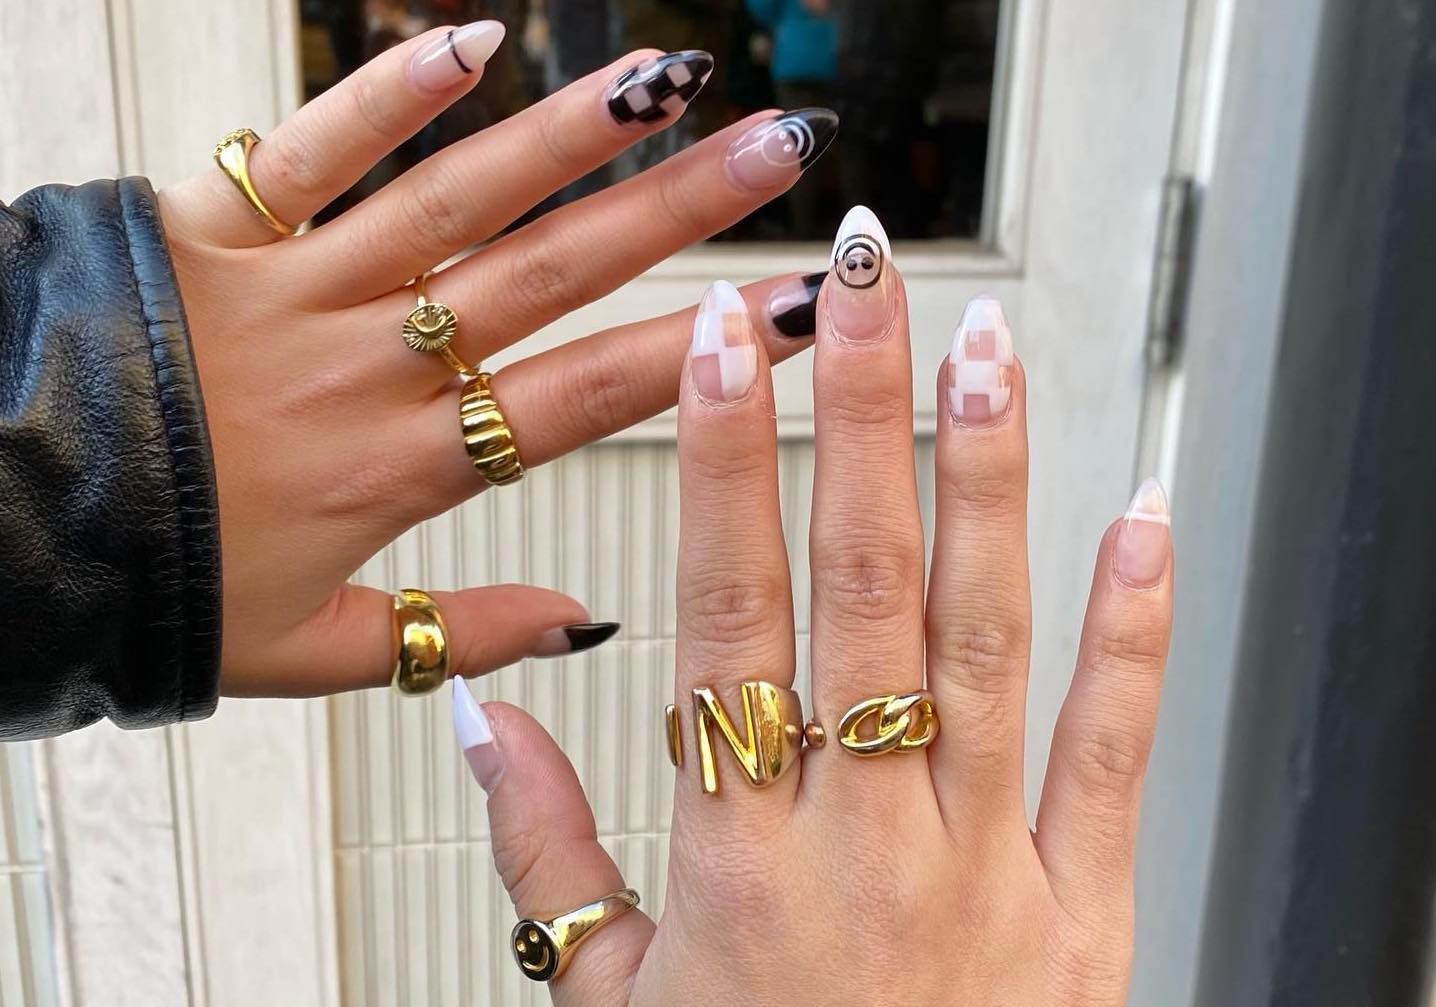 The 14 Best Press On Nails in 2022 – PureWow